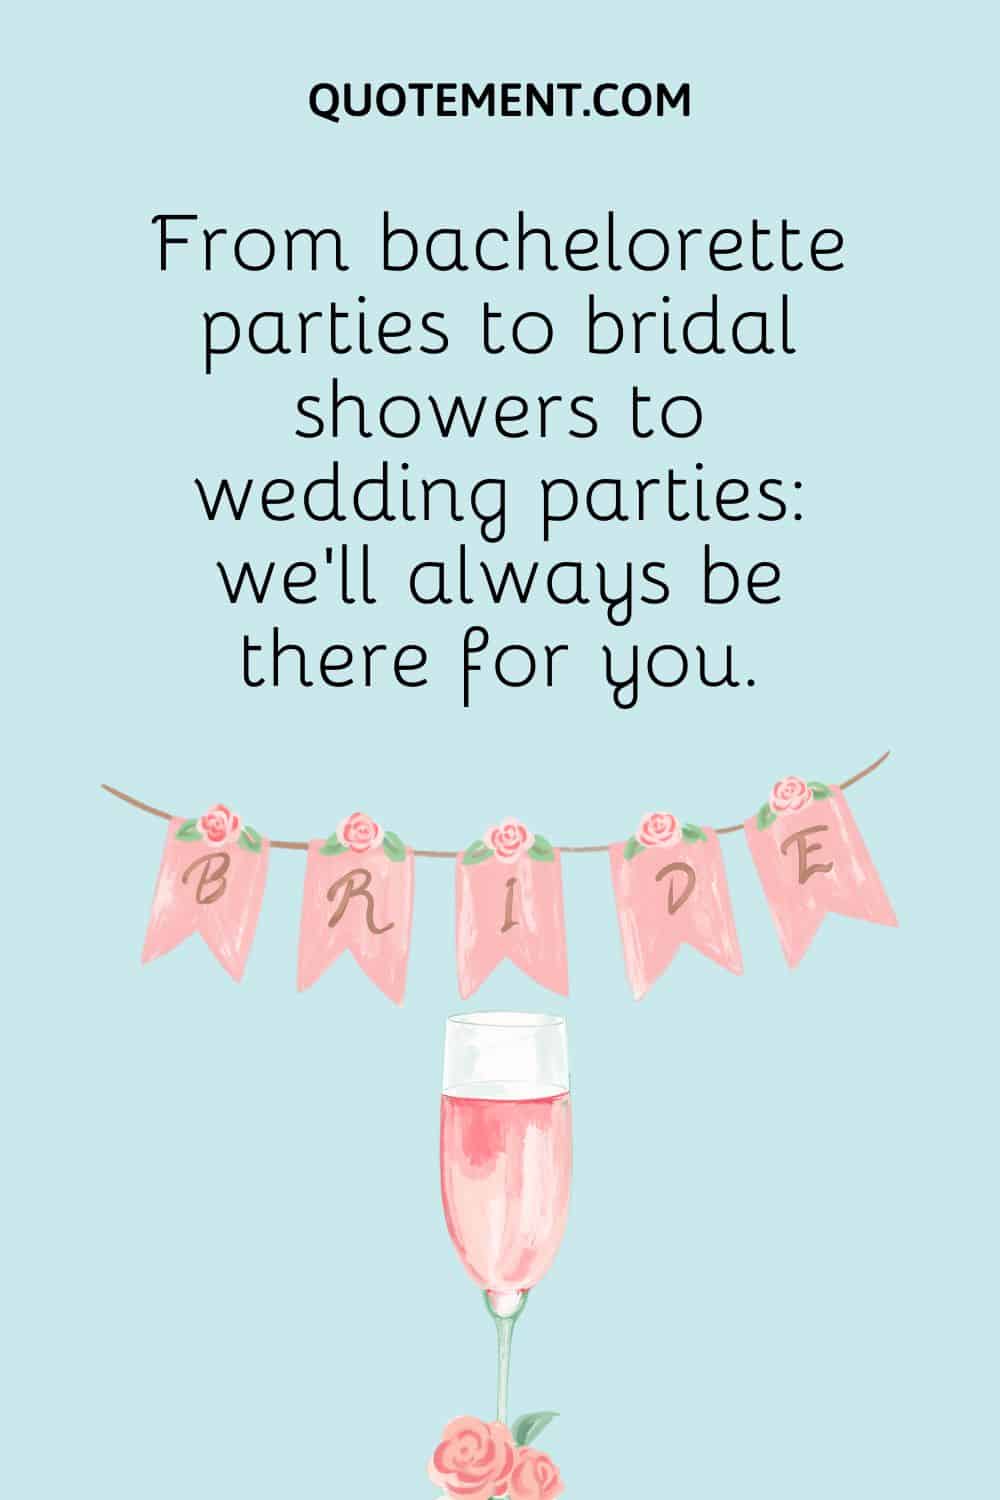 From bachelorette parties to bridal showers to wedding parties we’ll always be there for you.